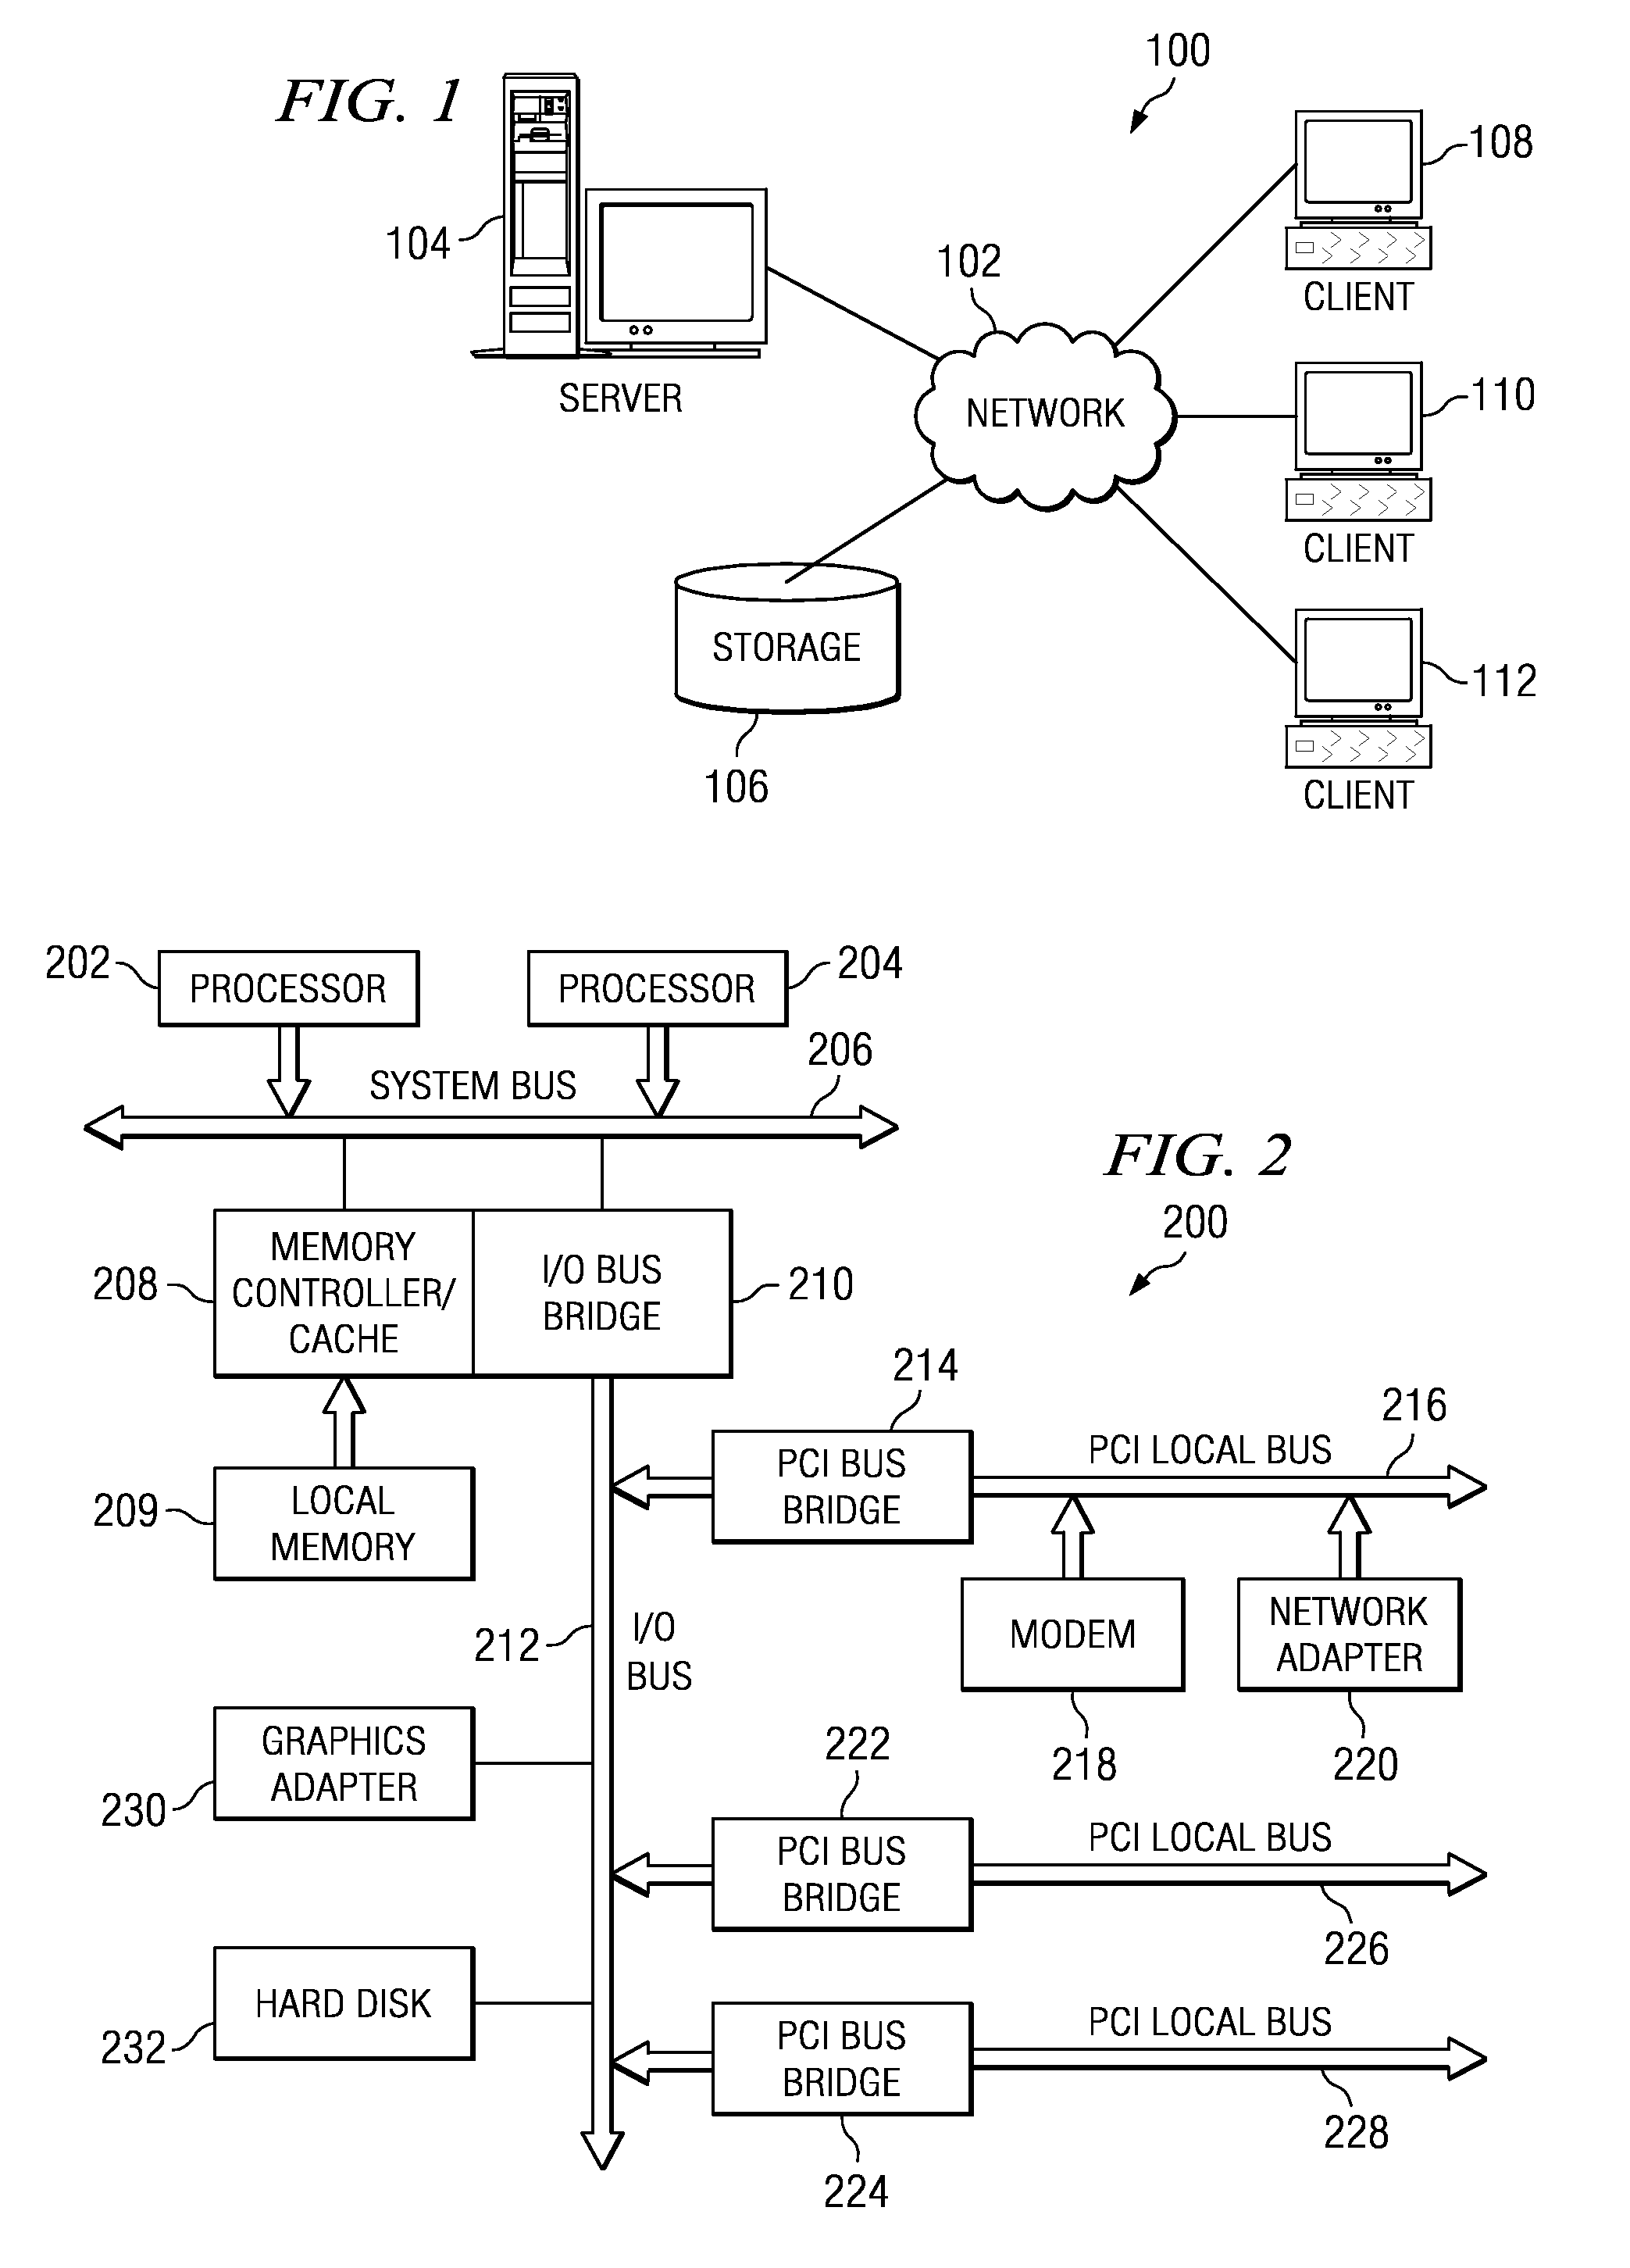 Method and Apparatus for Deploying and Instantiating Multiple Instances of Applications in Automated Data Centers Using Application Deployment Template